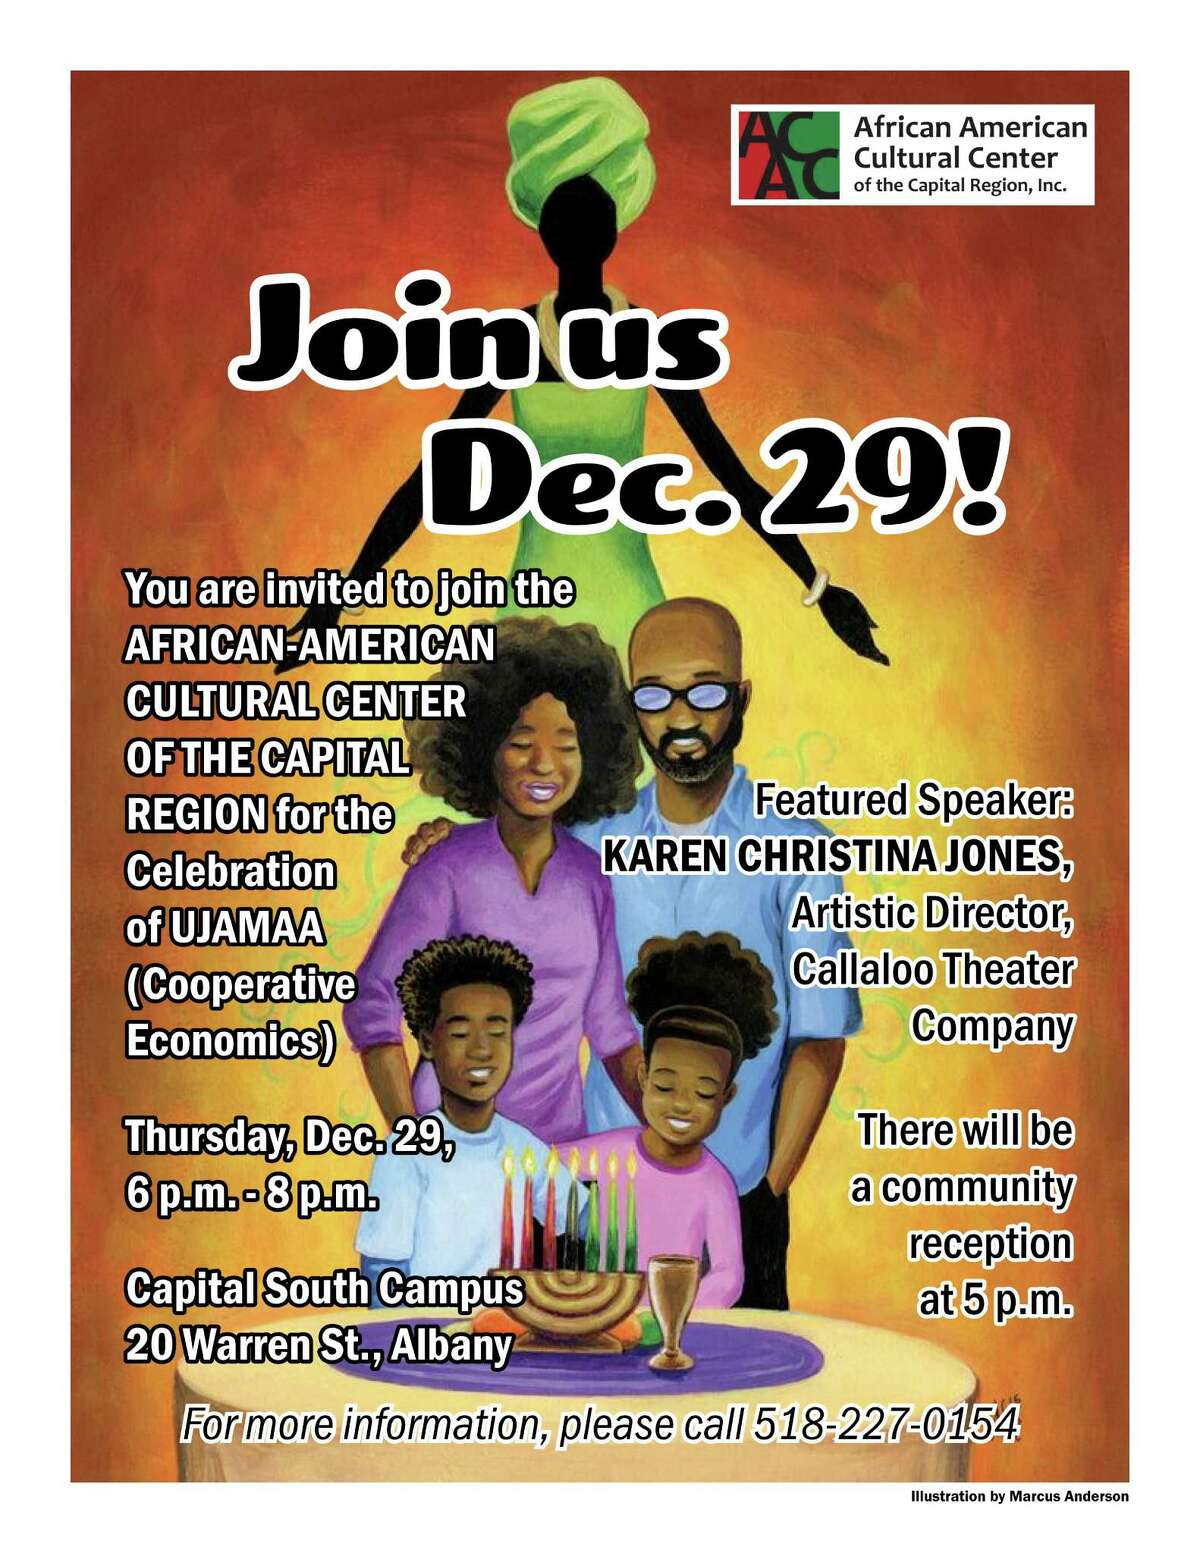 Poster for Thursday's Kwanzaa celebration in Albany.